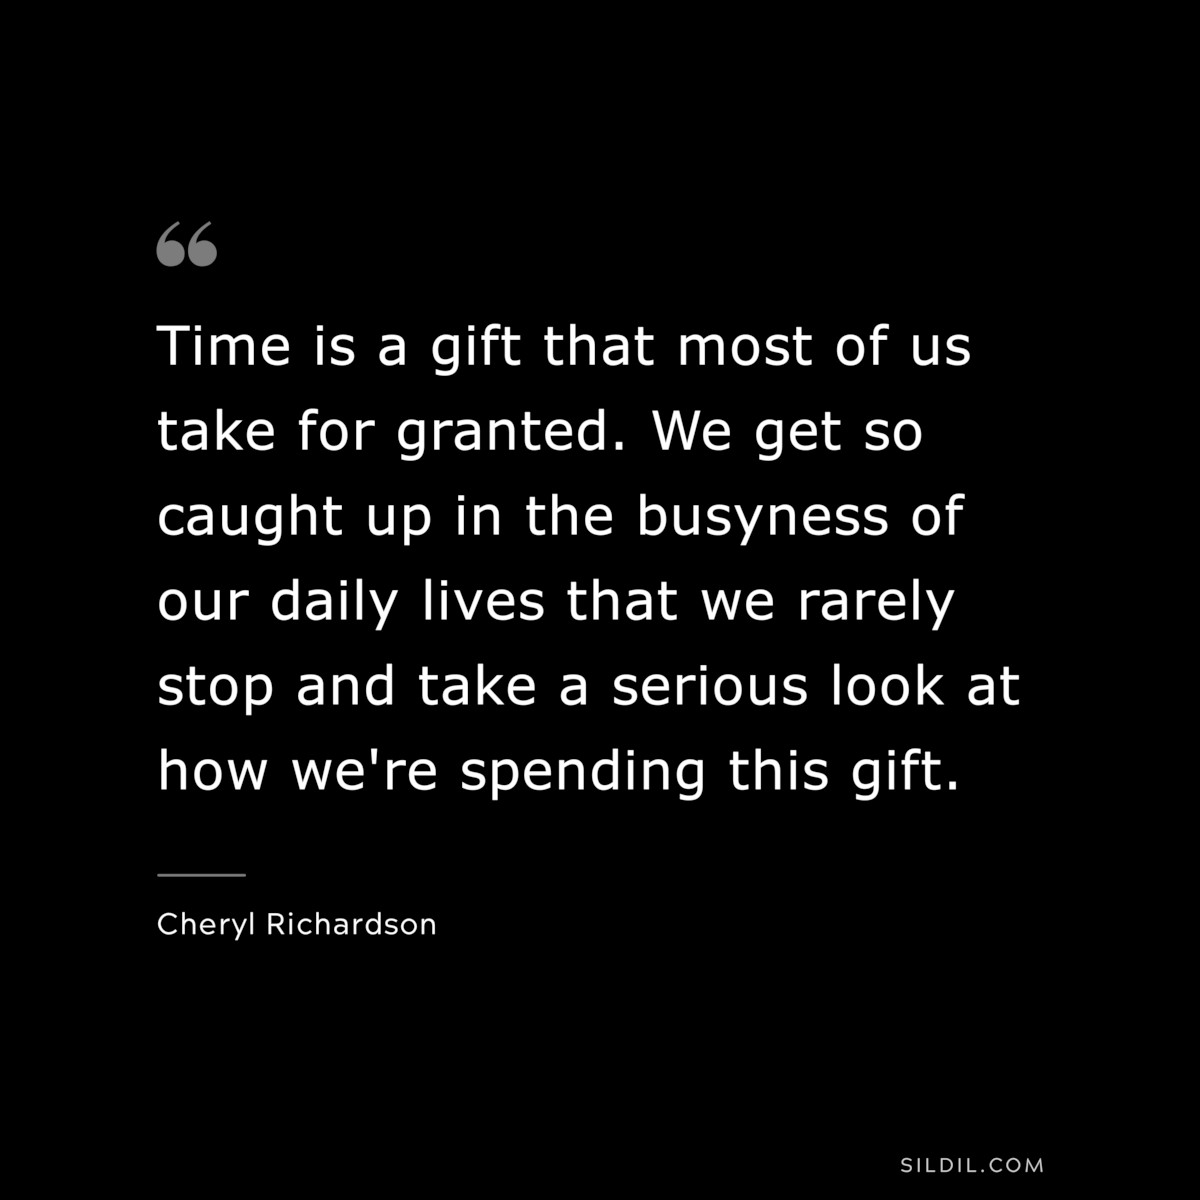 Time is a gift that most of us take for granted. We get so caught up in the busyness of our daily lives that we rarely stop and take a serious look at how we're spending this gift. ― Cheryl Richardson